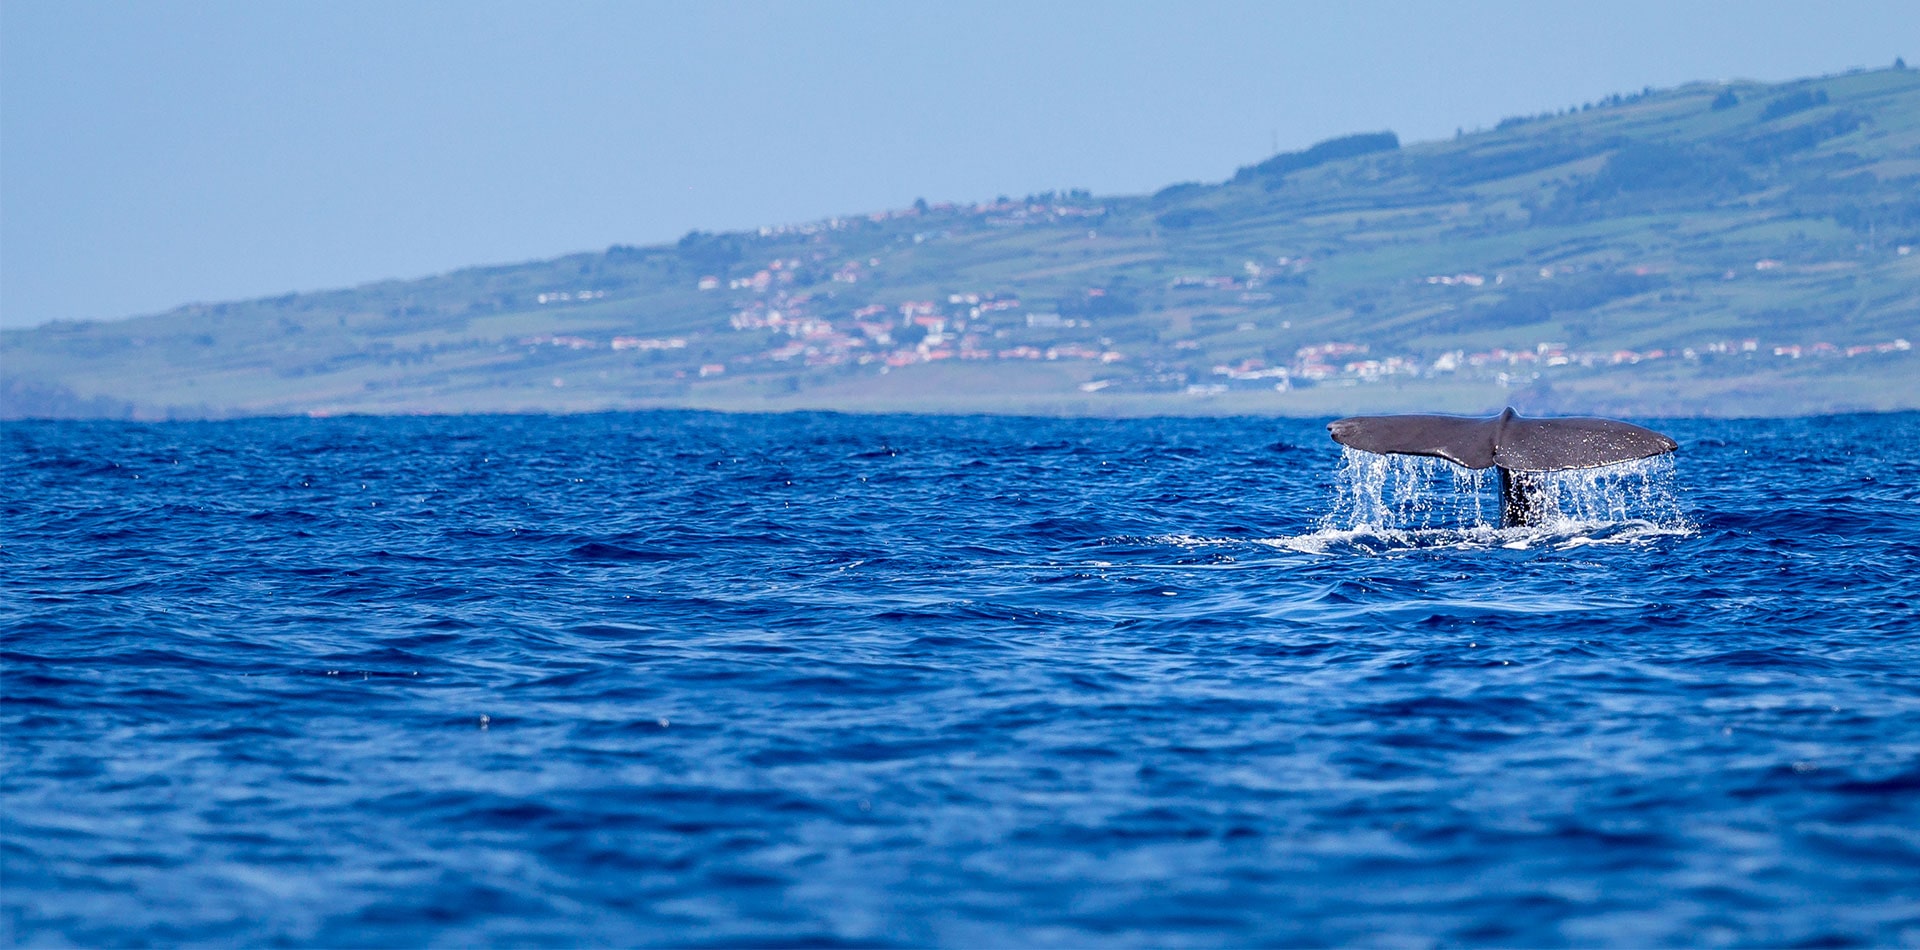 Whale tail, Azores